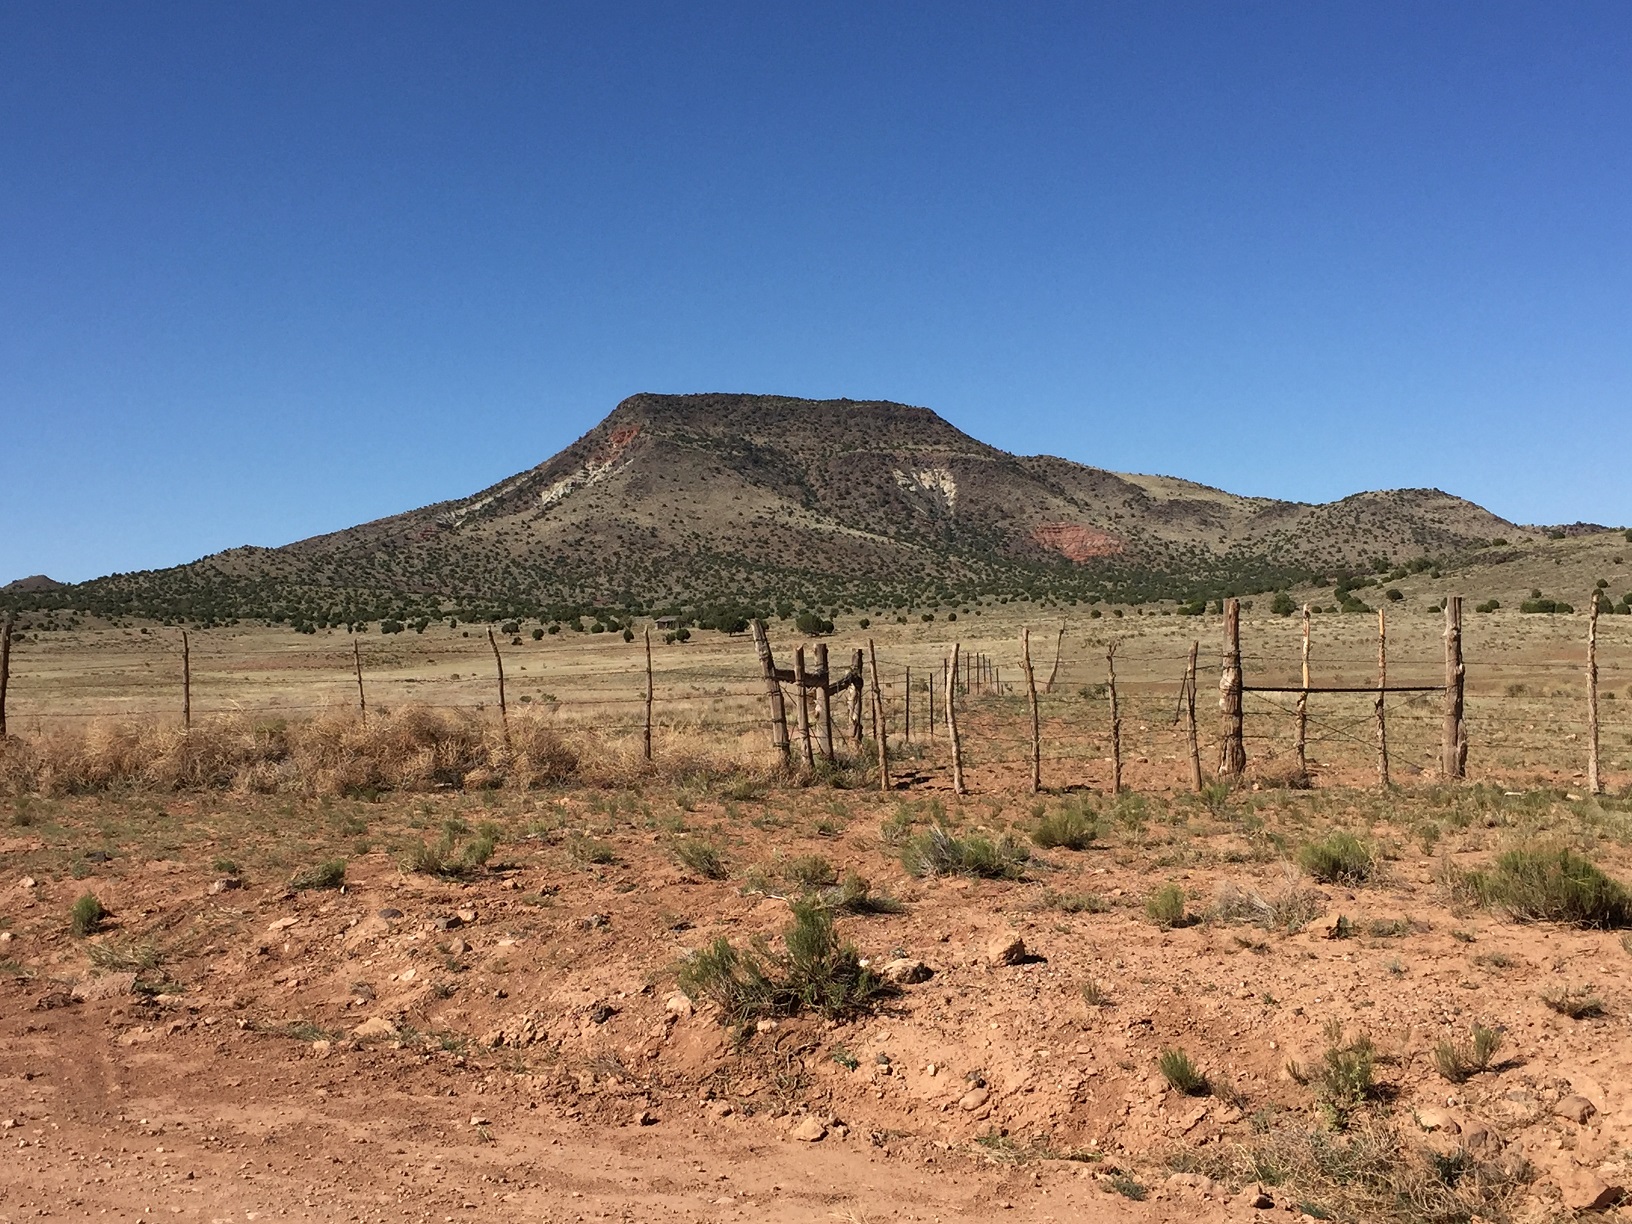 Diamond Butte with fences in the foreground